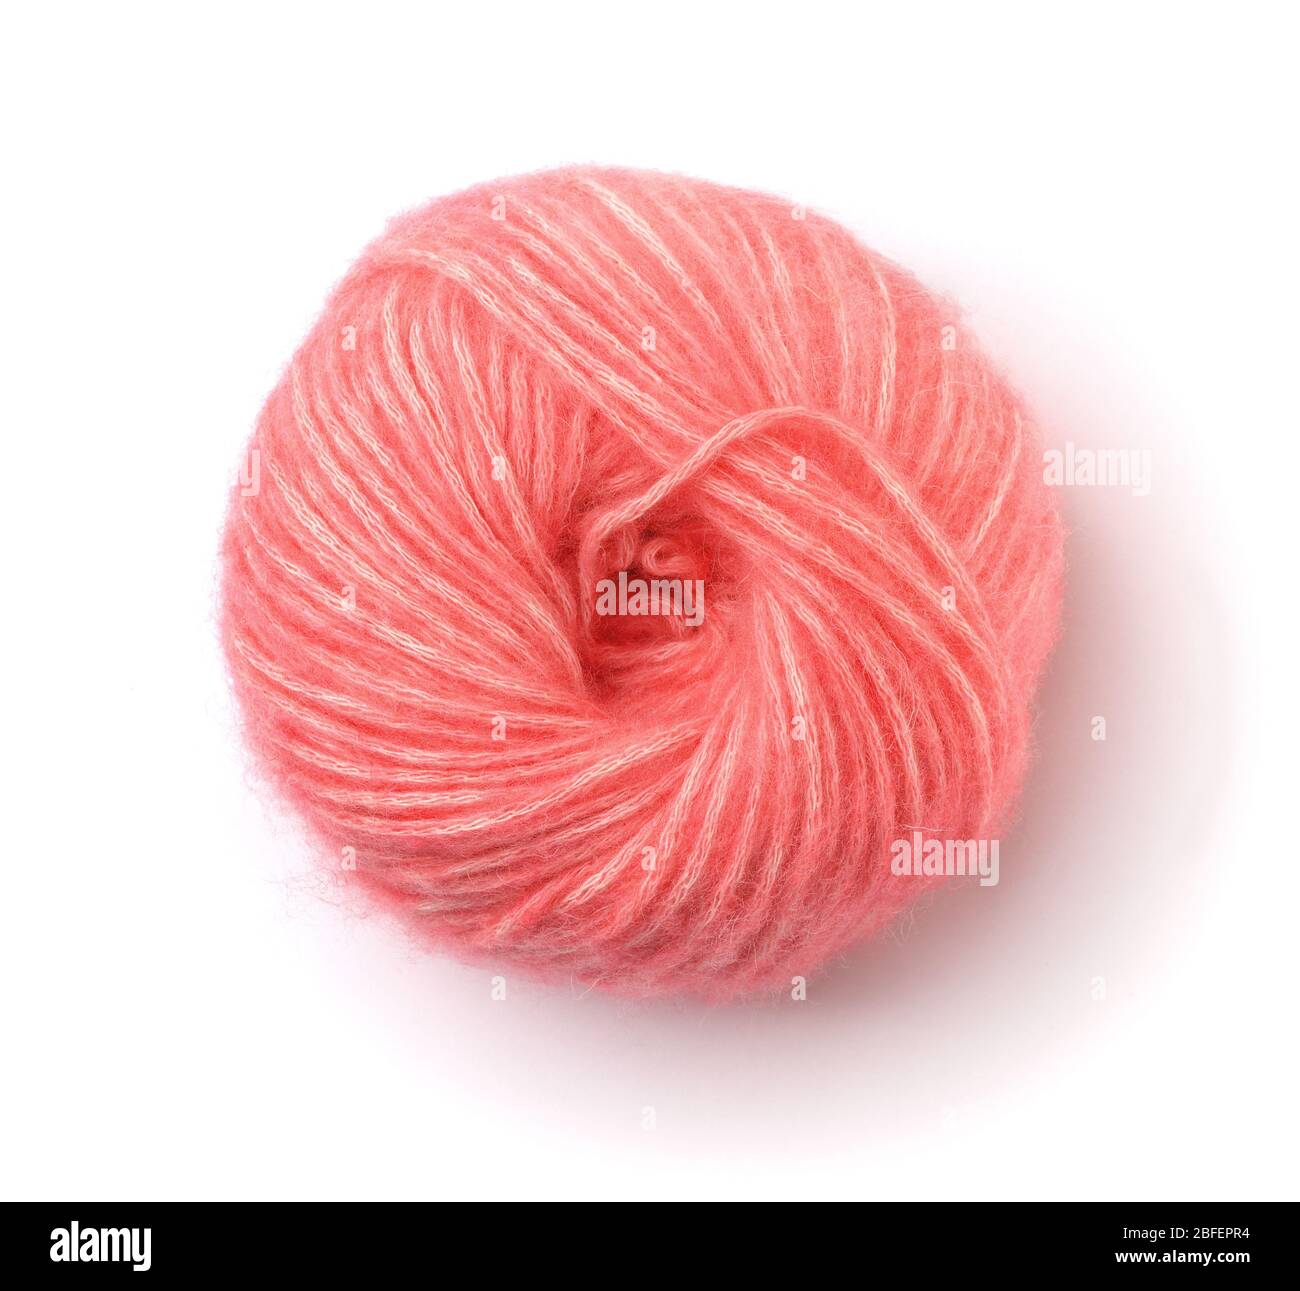 Top view of fluffy pink yarn ball isolated on white Stock Photo